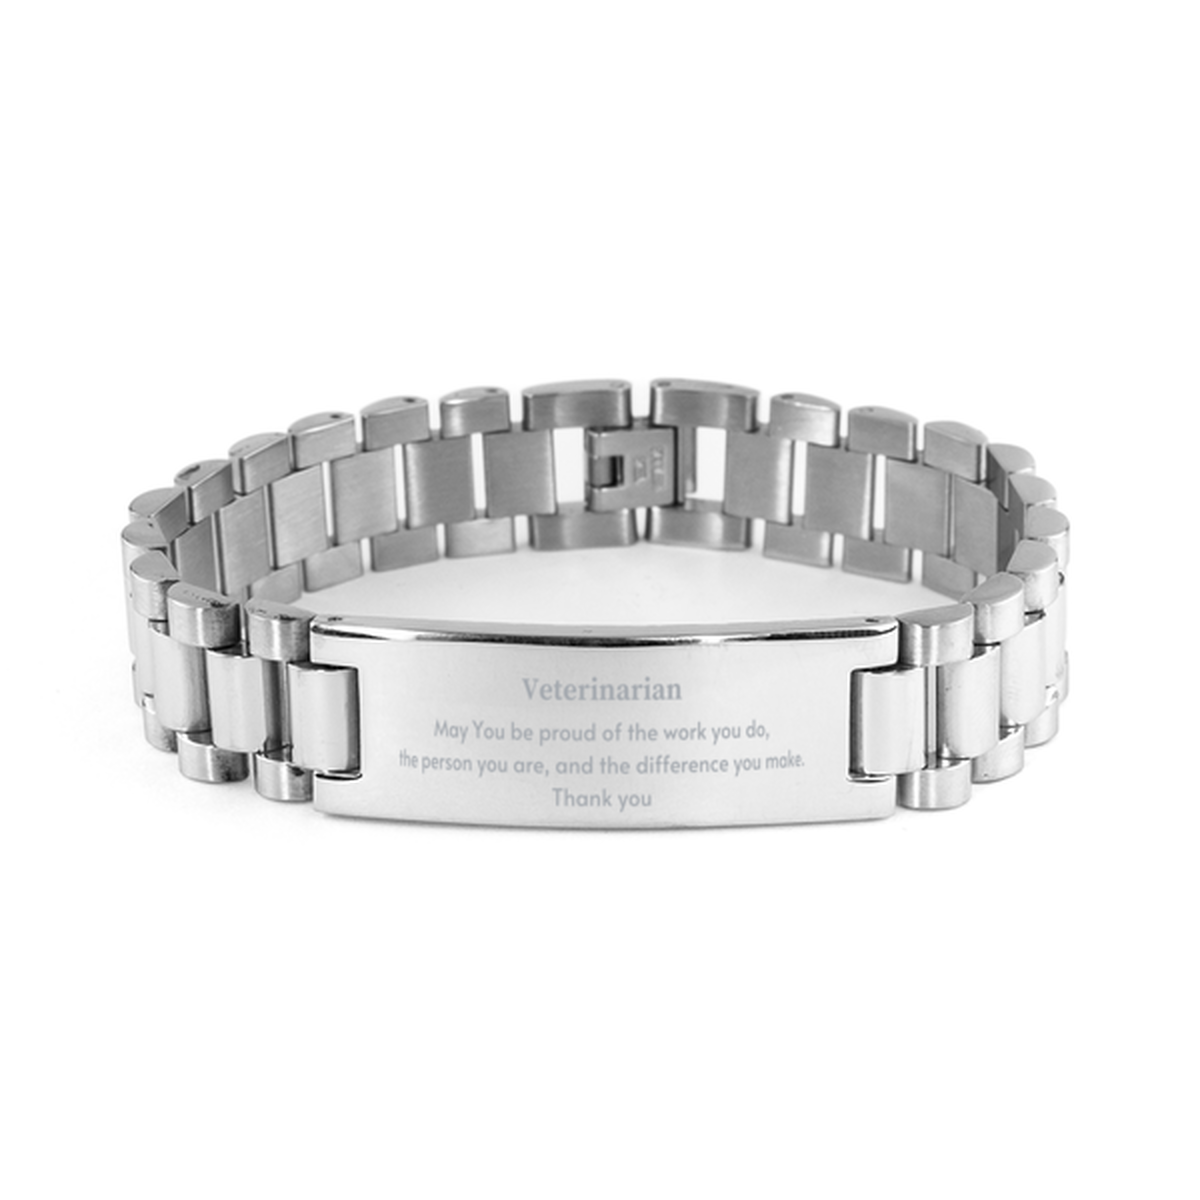 Heartwarming Ladder Stainless Steel Bracelet Retirement Coworkers Gifts for Veterinarian, Veterinarian May You be proud of the work you do, the person you are Gifts for Boss Men Women Friends